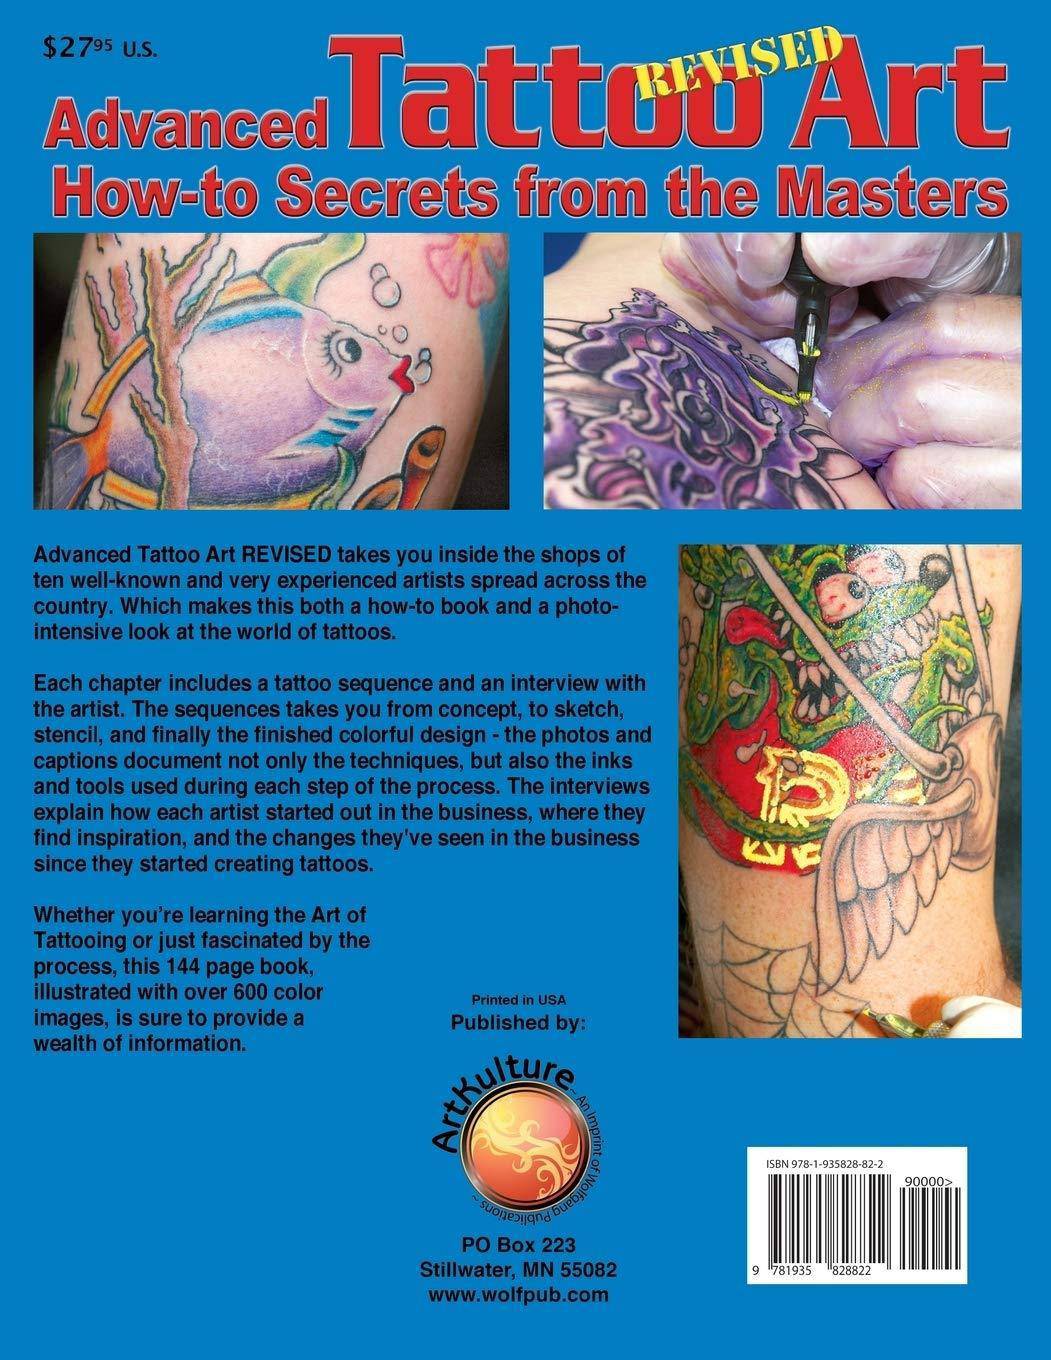 Advanced Tattoo Art- Revised: How-To Secrets from the Masters (R - SureShot Books Publishing LLC